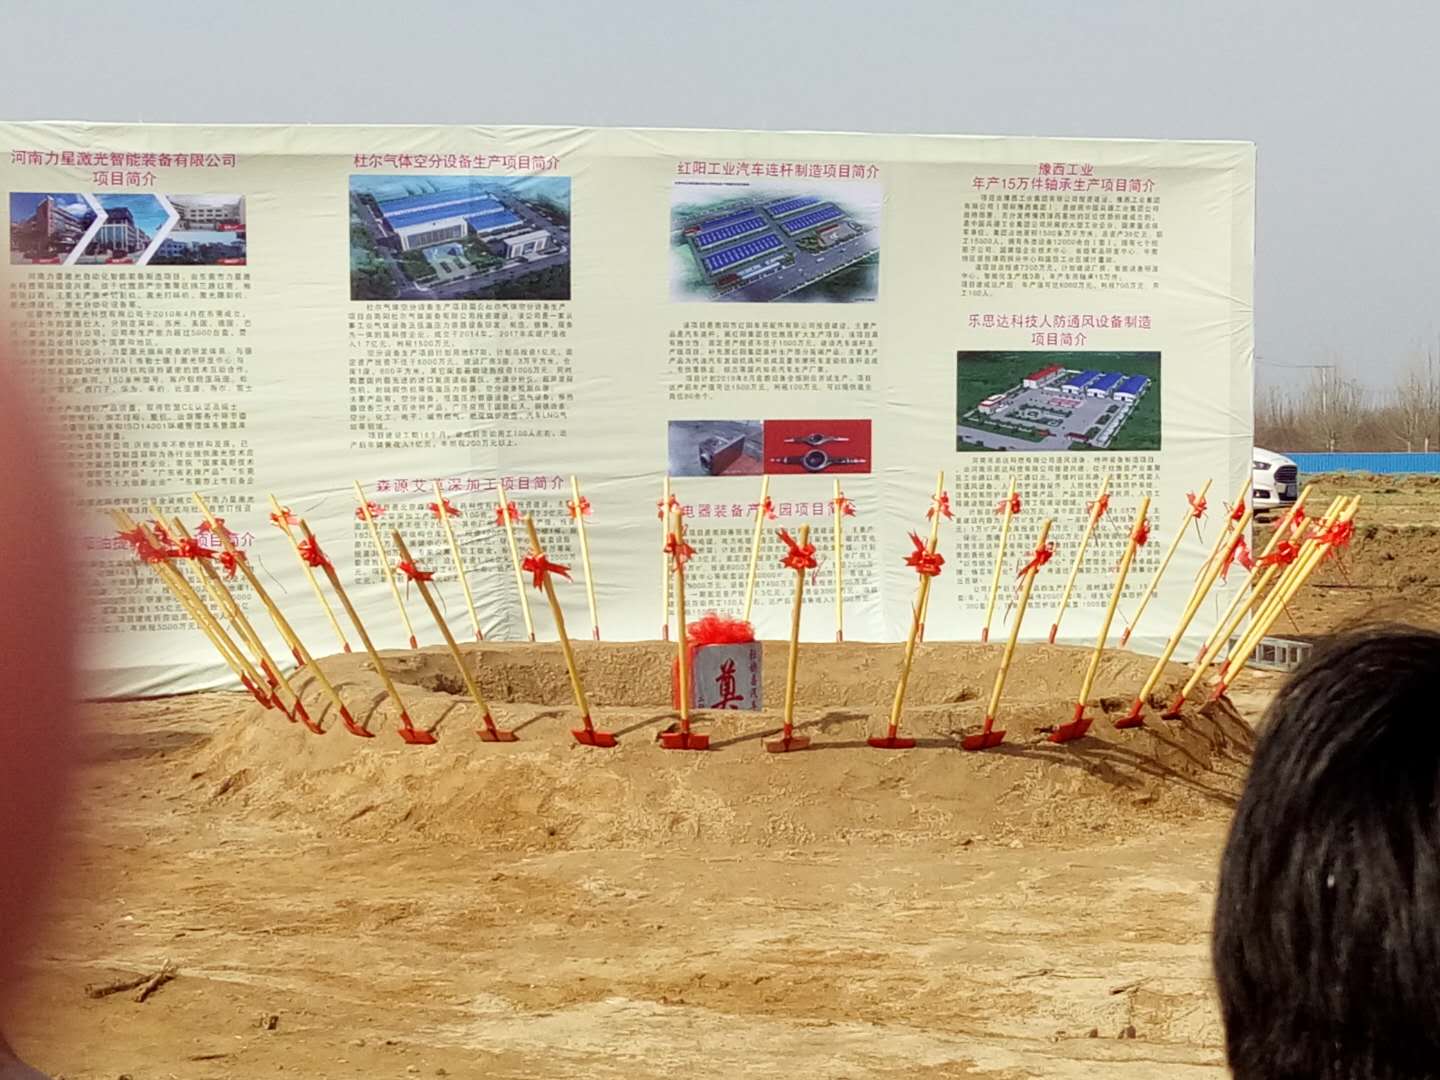 Changxing Steel Structure was invited to participate in the holding ceremony of key projects in Sheq